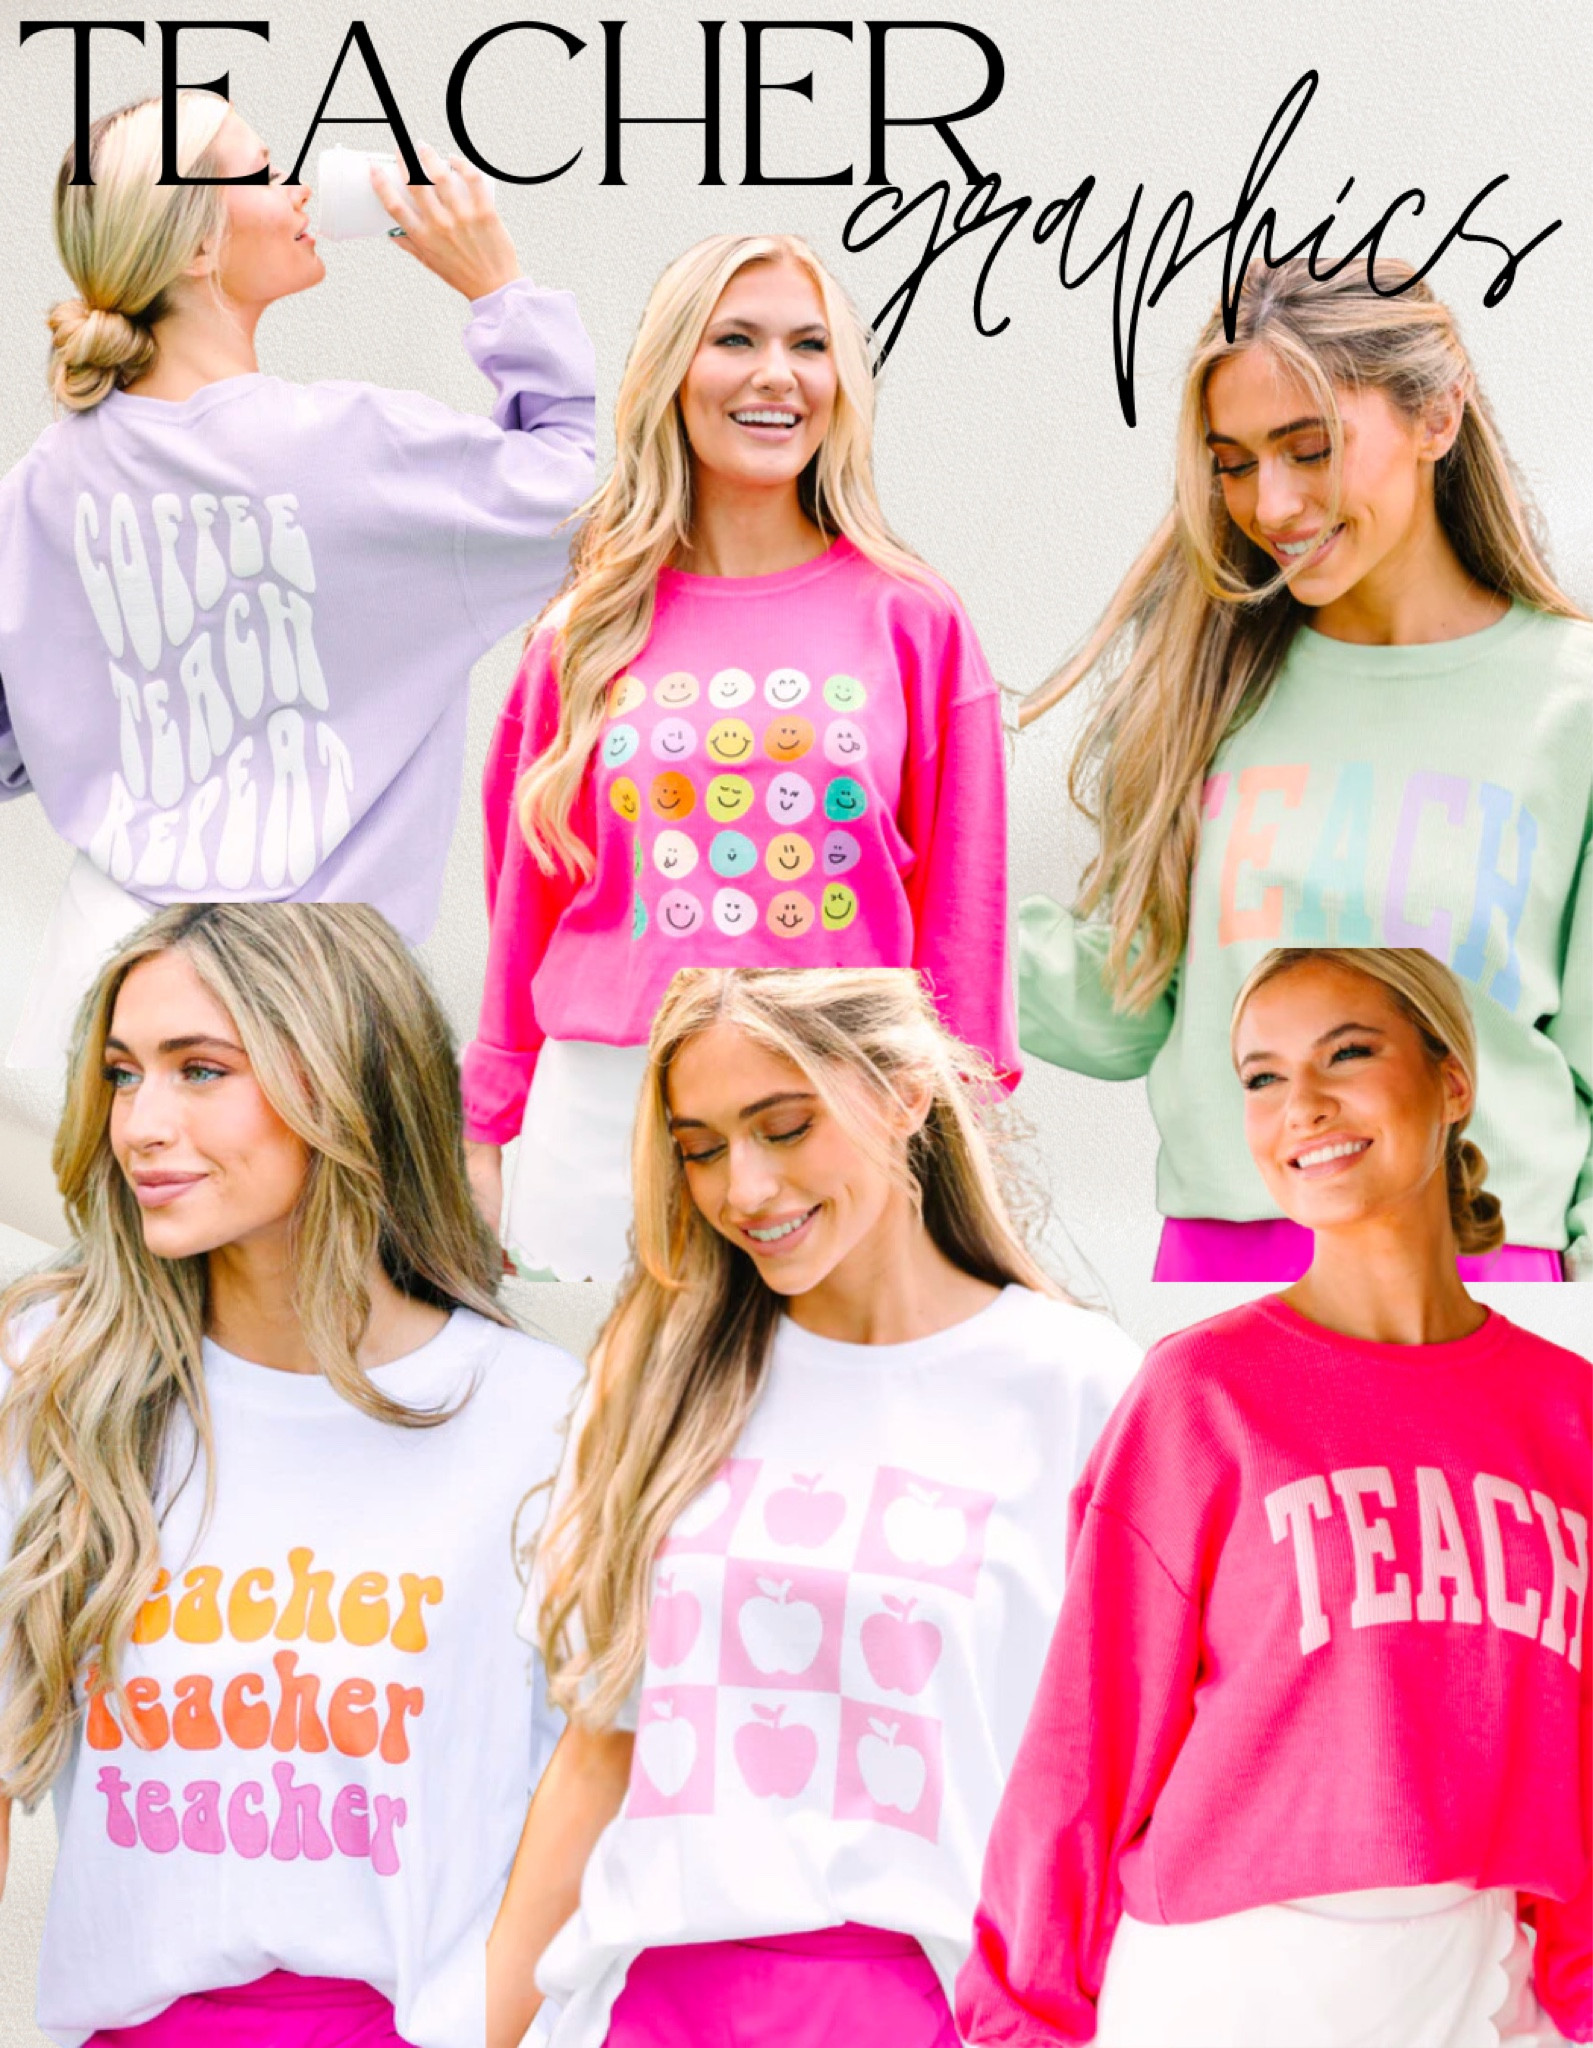 Teach Puff Vinyl Fuchsia Pink Graphic Corded Sweatshirt, Large - The Mint Julep Boutique | Women's Boutique Clothing